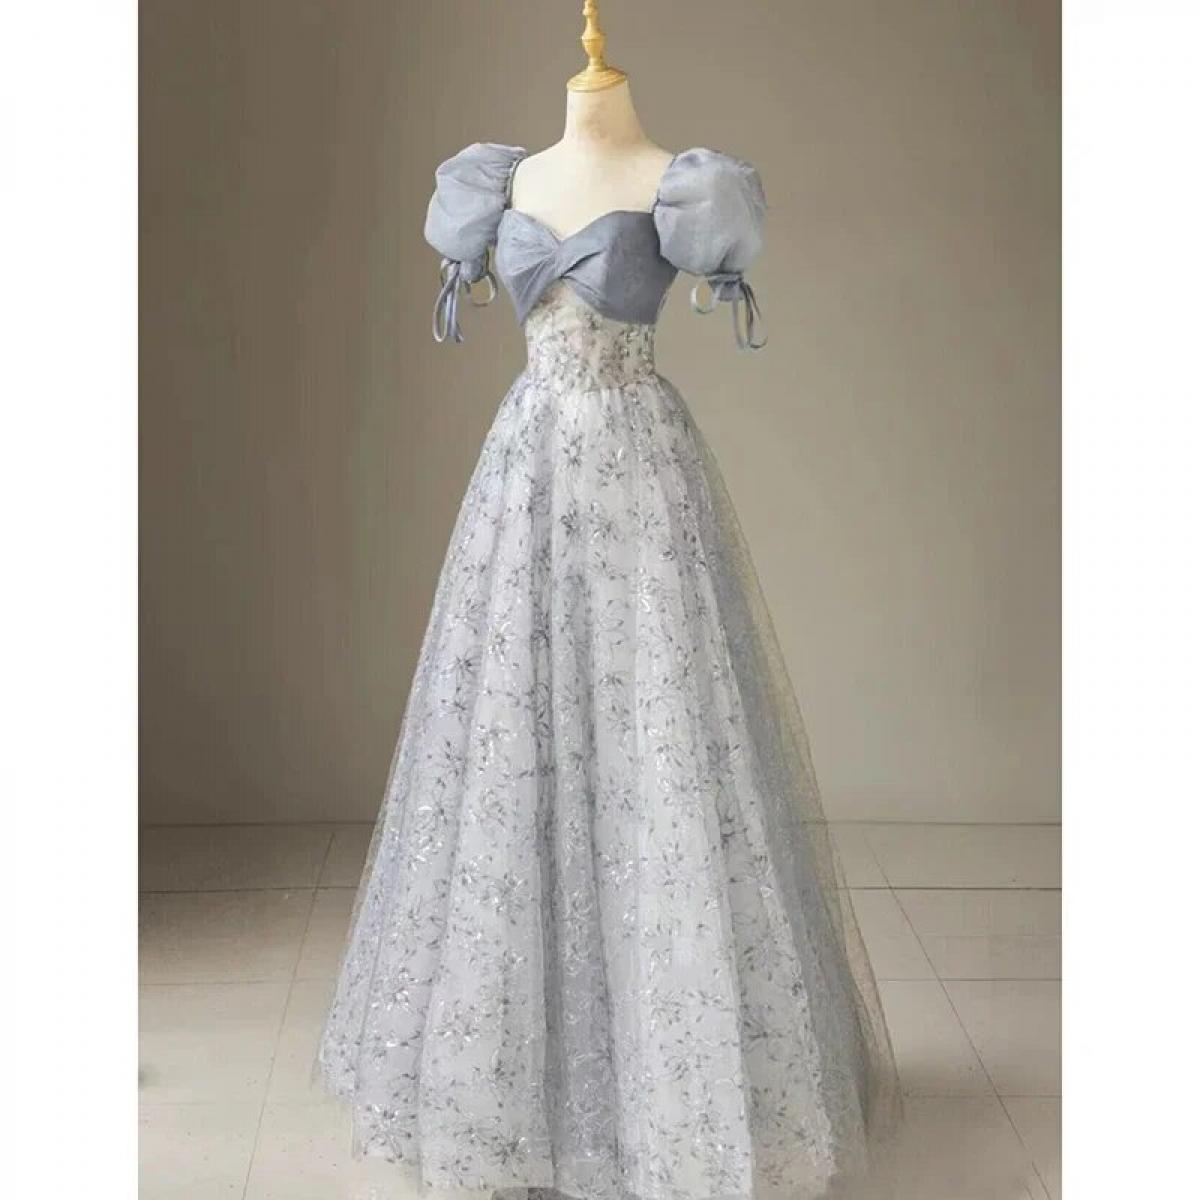 Prom Dresses For Women Gala Woman's Evening Dress Party Evening Elegant Luxury Celebrity Long Dresses For Special Events